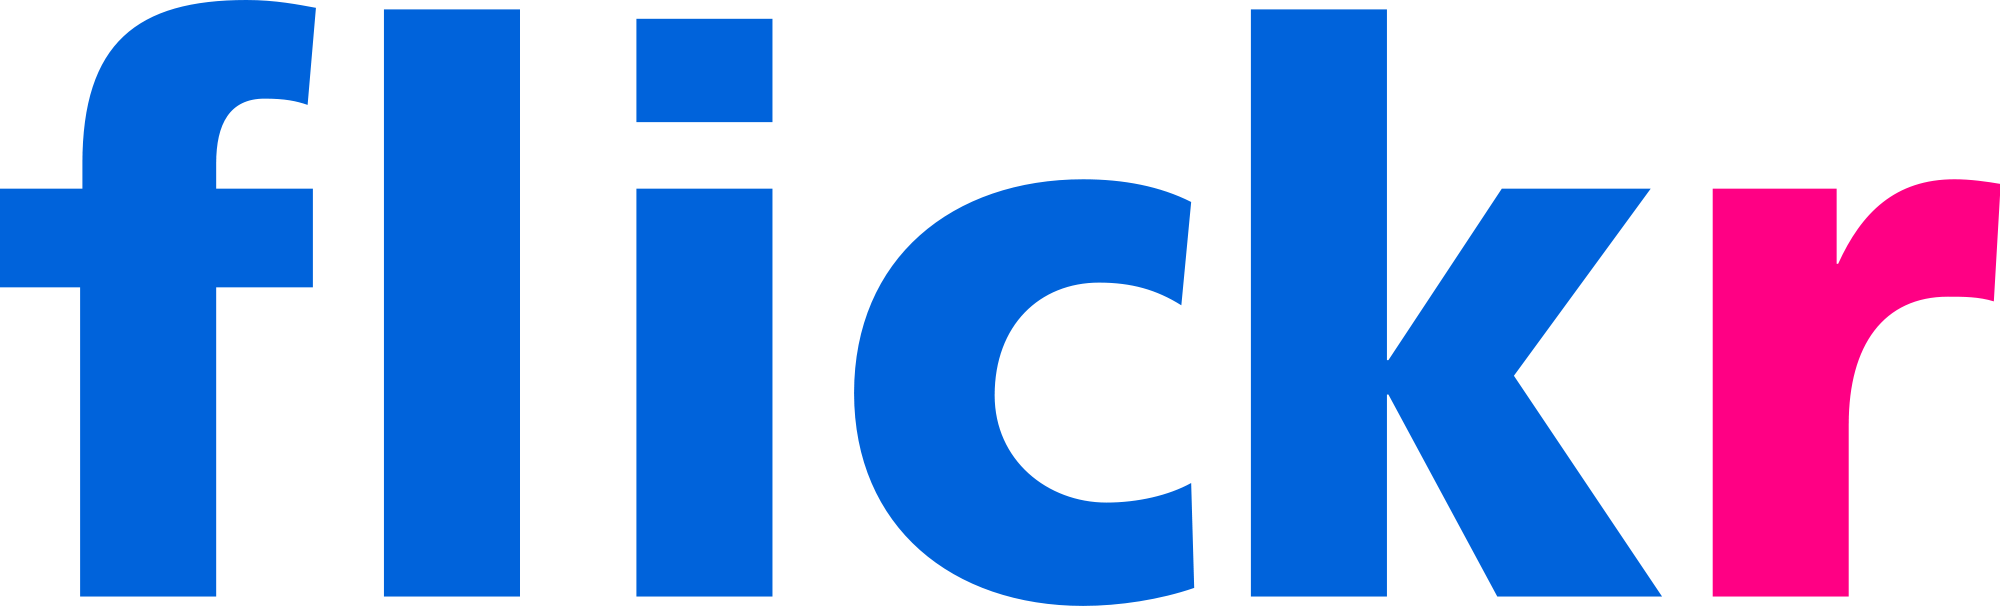 Flickr logo. If you click it, you'll go home